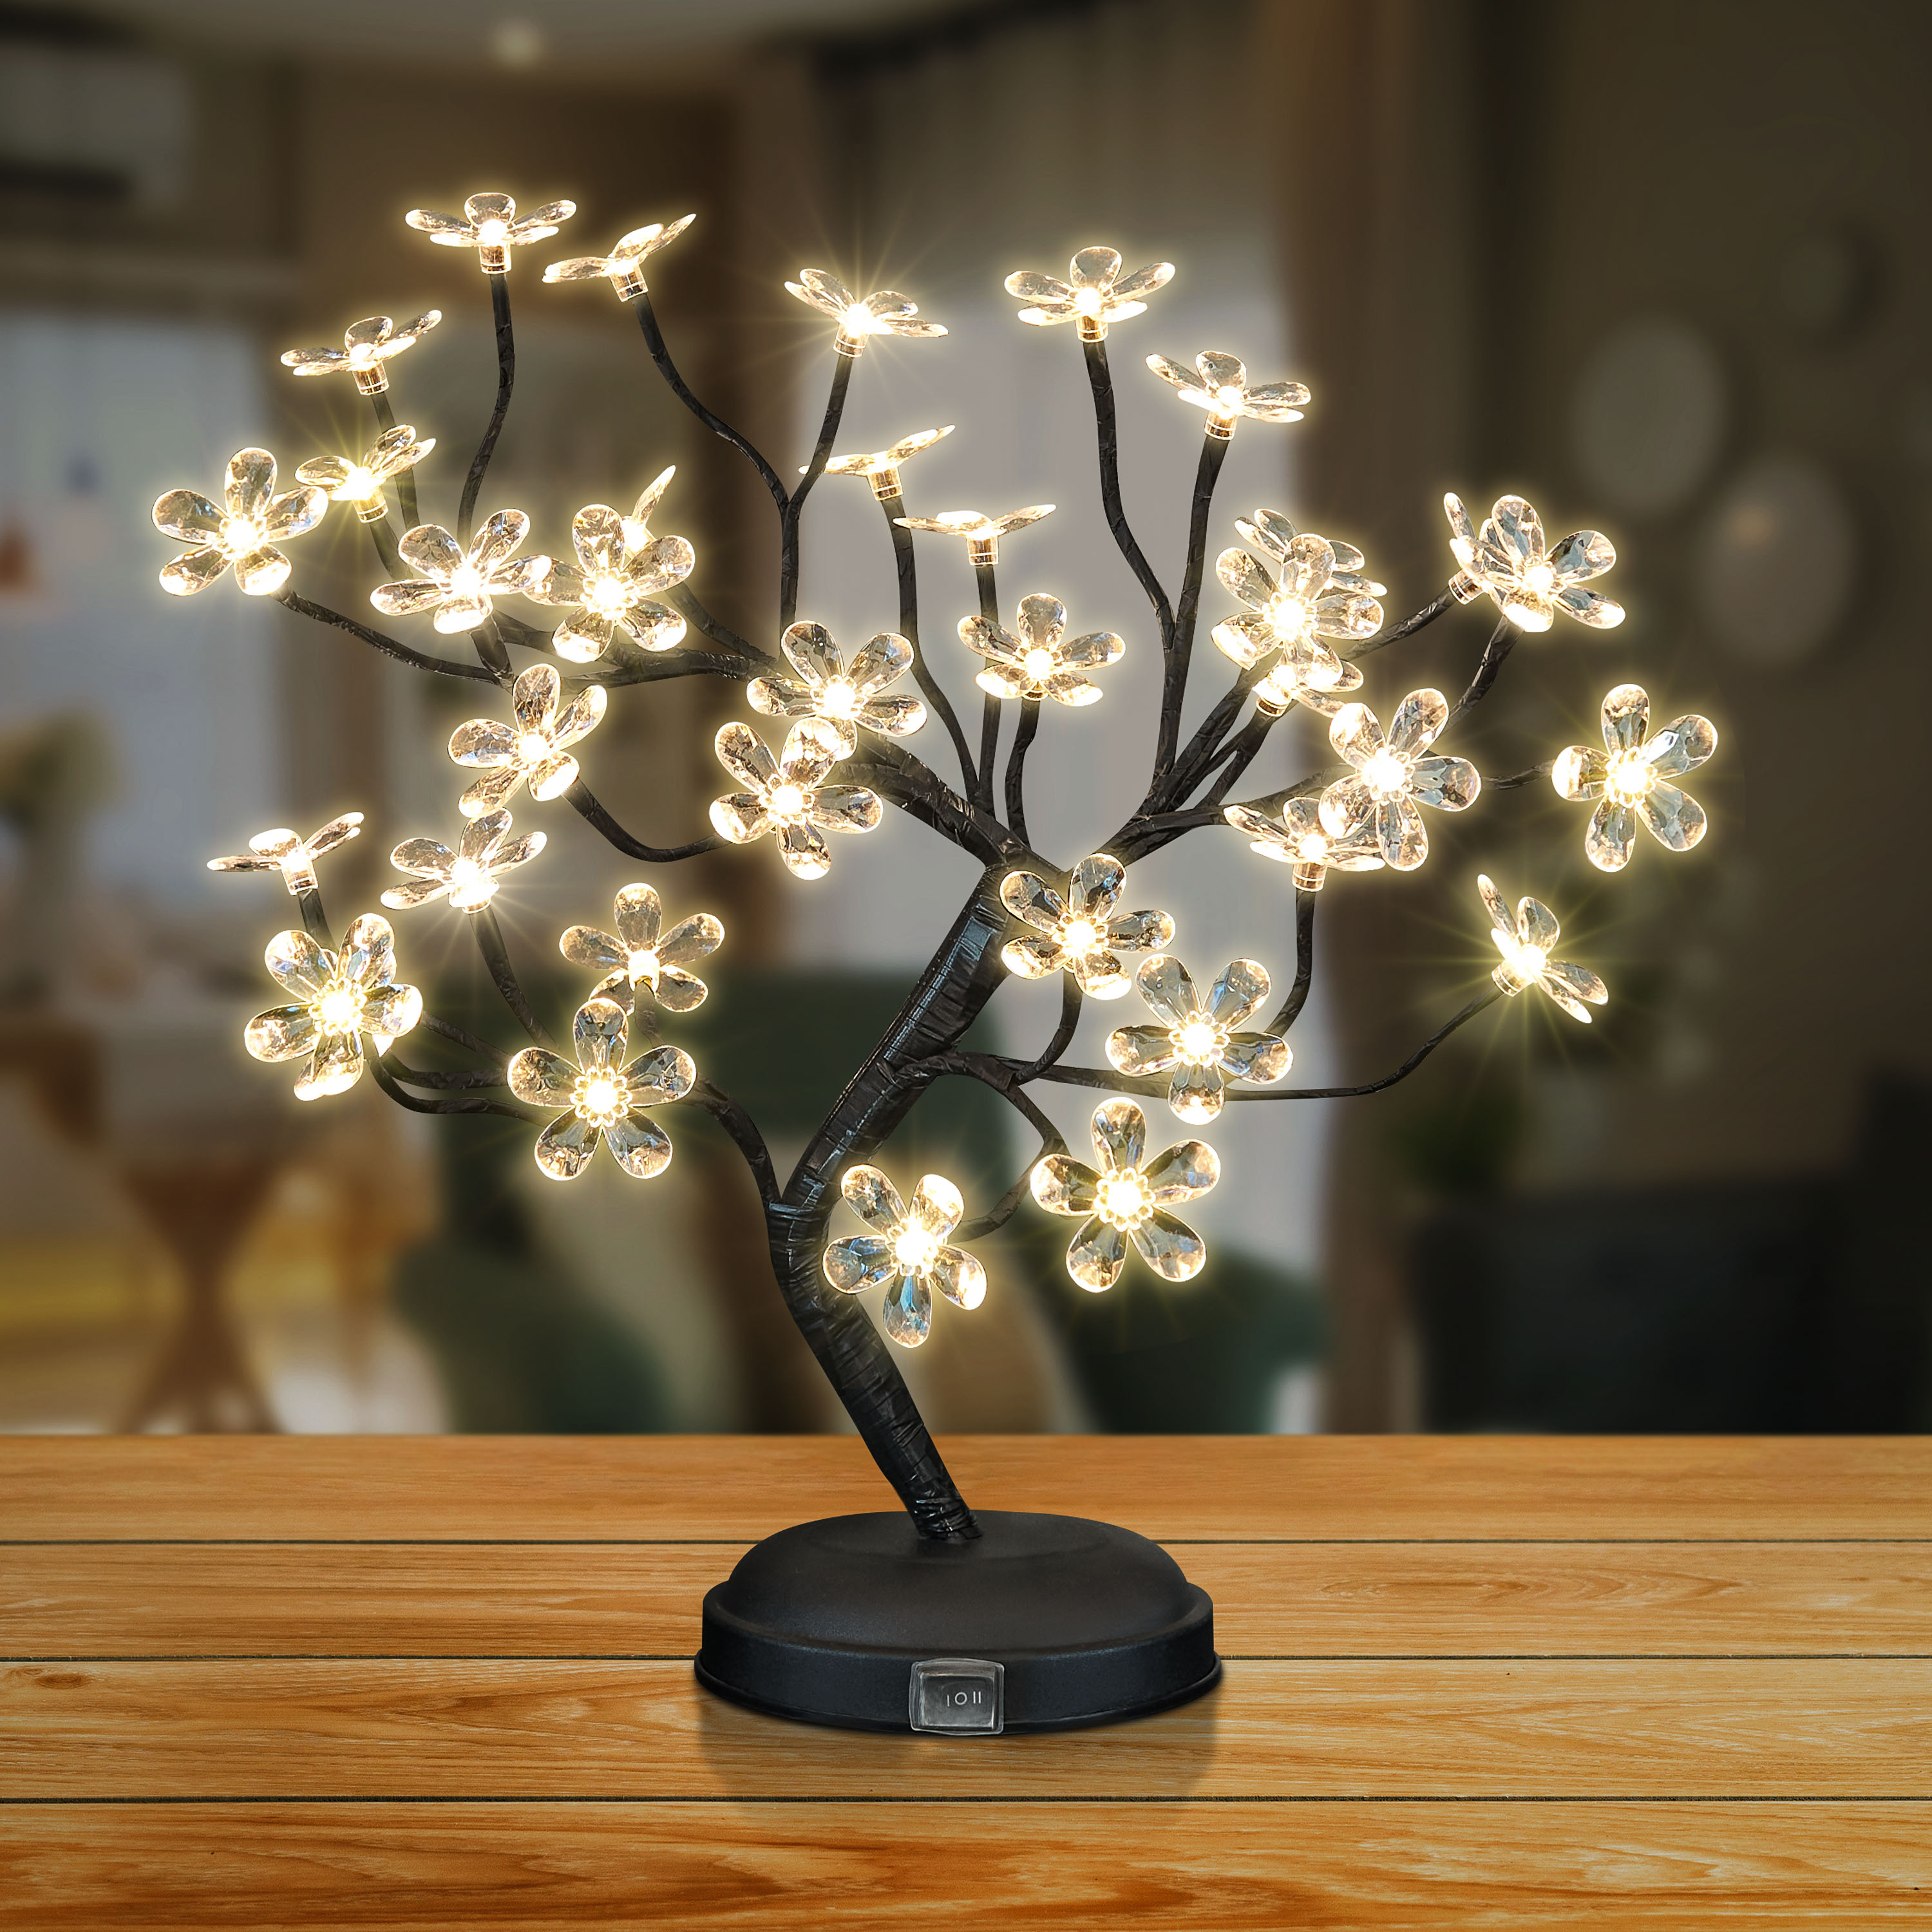 18IN Lighted Cherry Blossom Tree Lamp with 36 Acrylic LED, Adapter Plug in & Battery Powered, for Indoor and Outdoor, Warm White